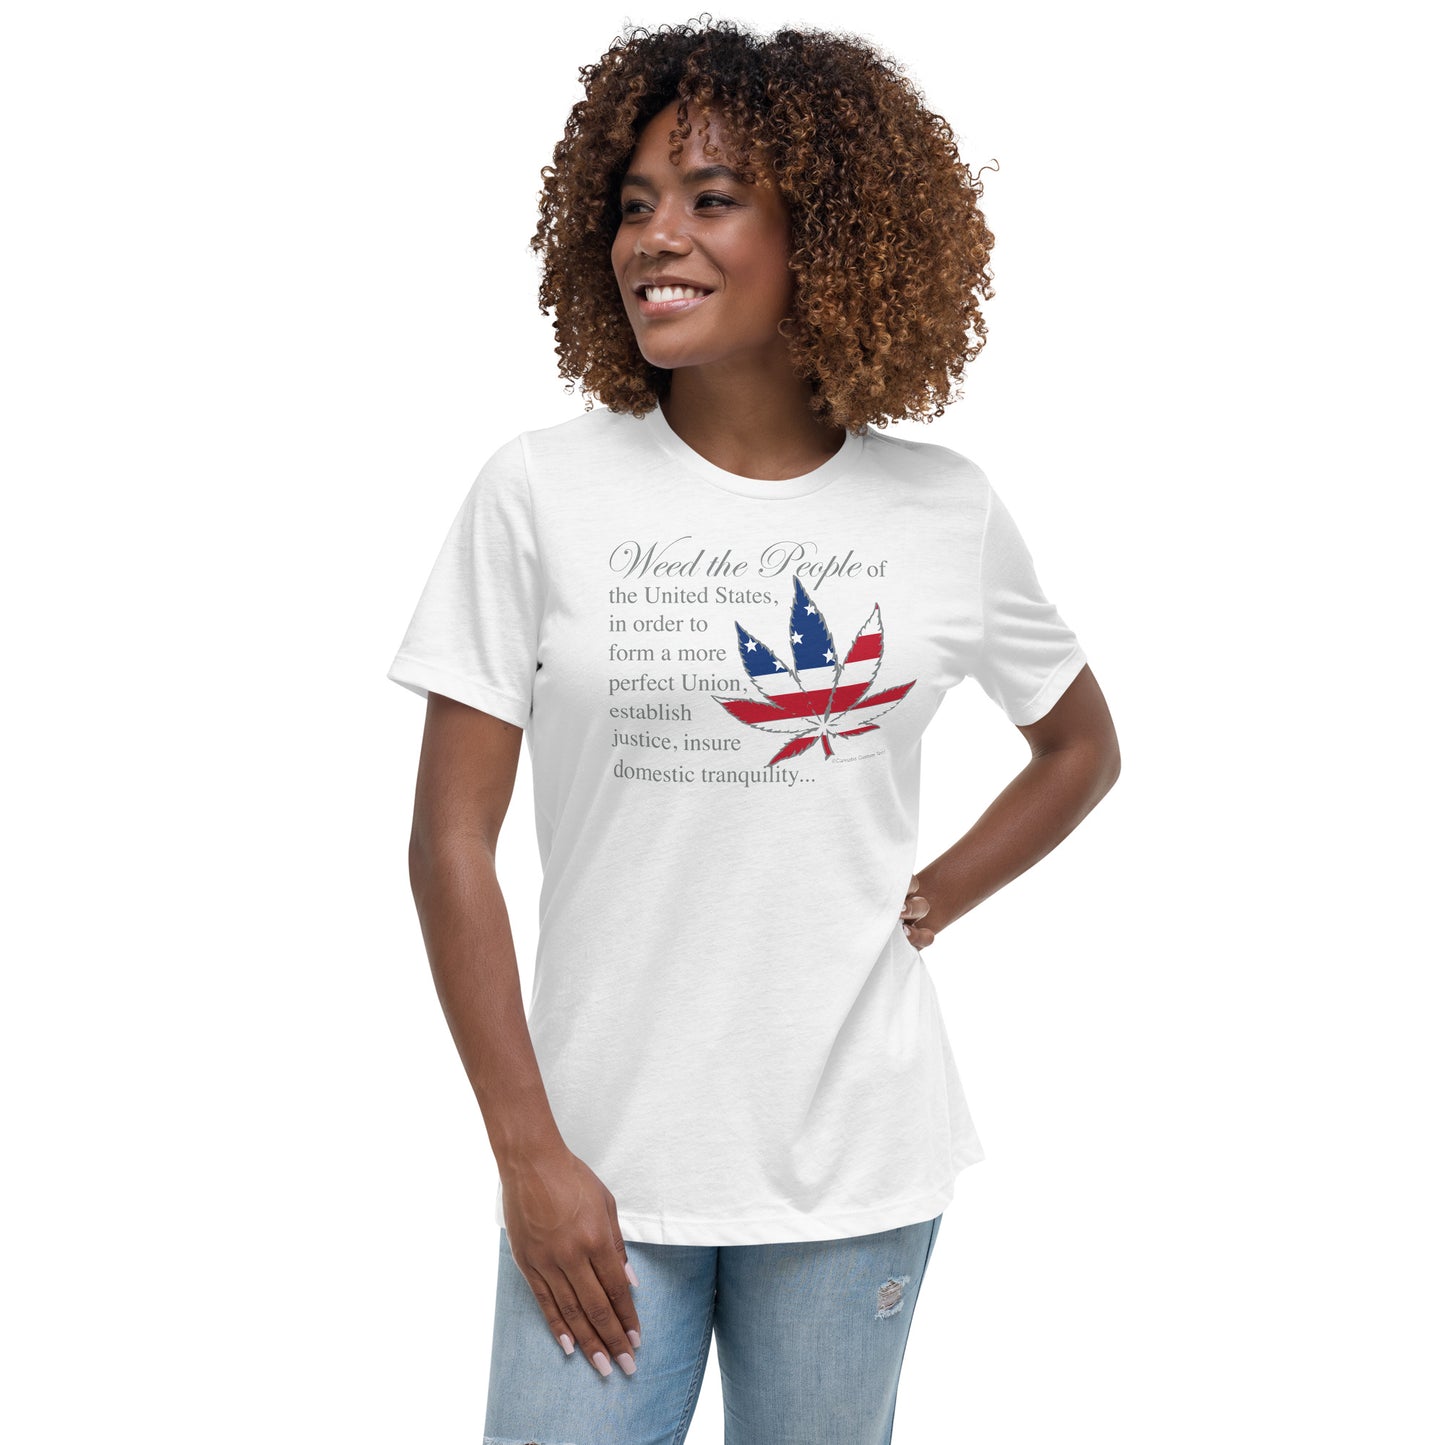 Weed the People Women's Relaxed T-Shirt